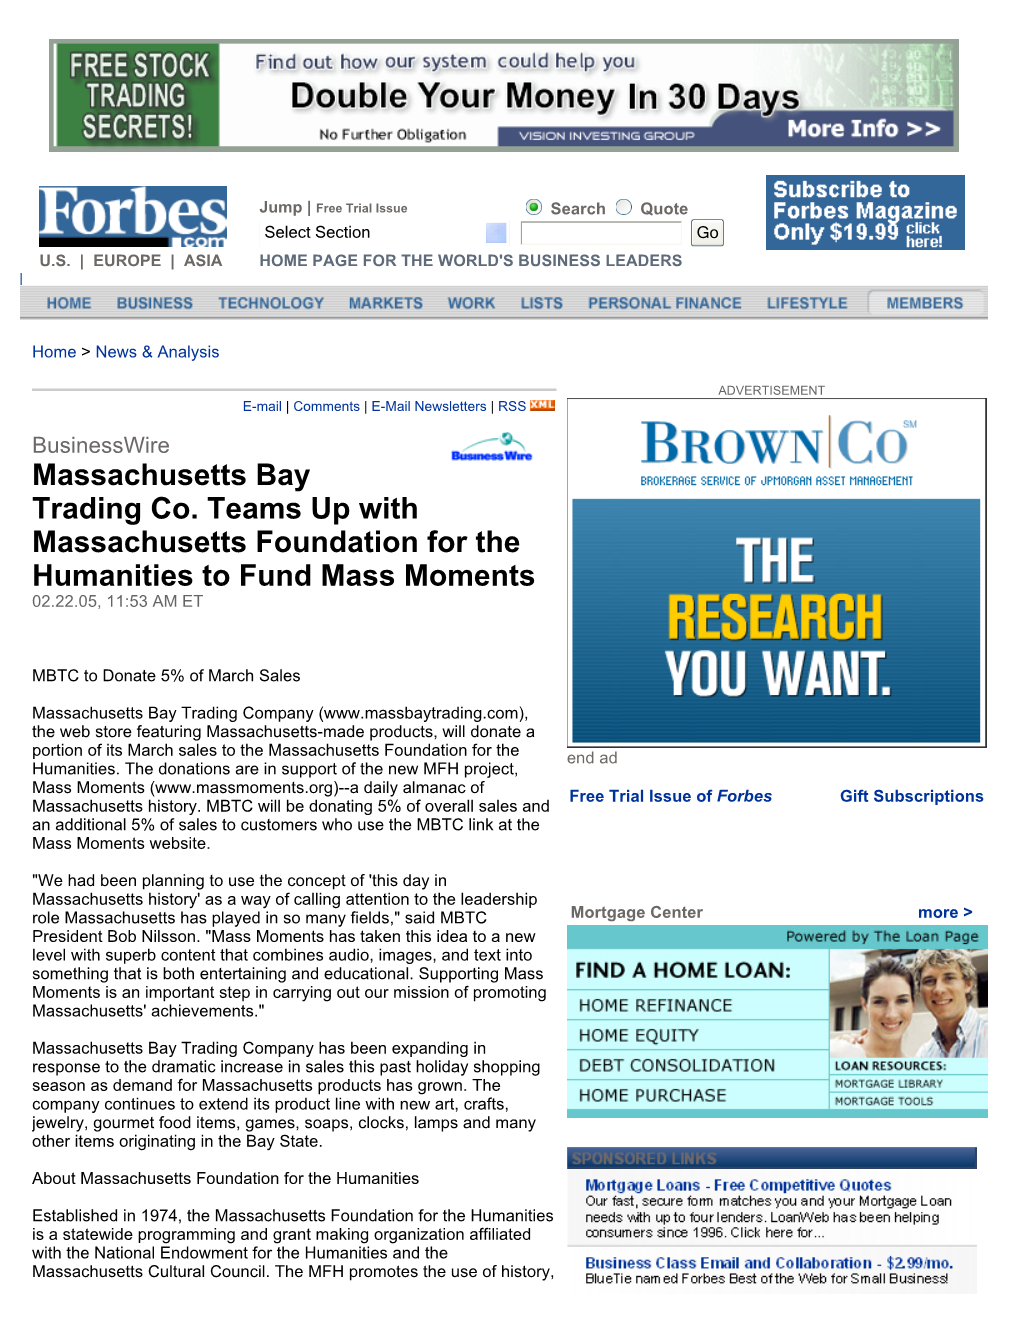 Massachusetts Bay Trading Co. Teams up with Massachusetts Foundation for the Humanities to Fund Mass Moments 02.22.05, 11:53 AM ET